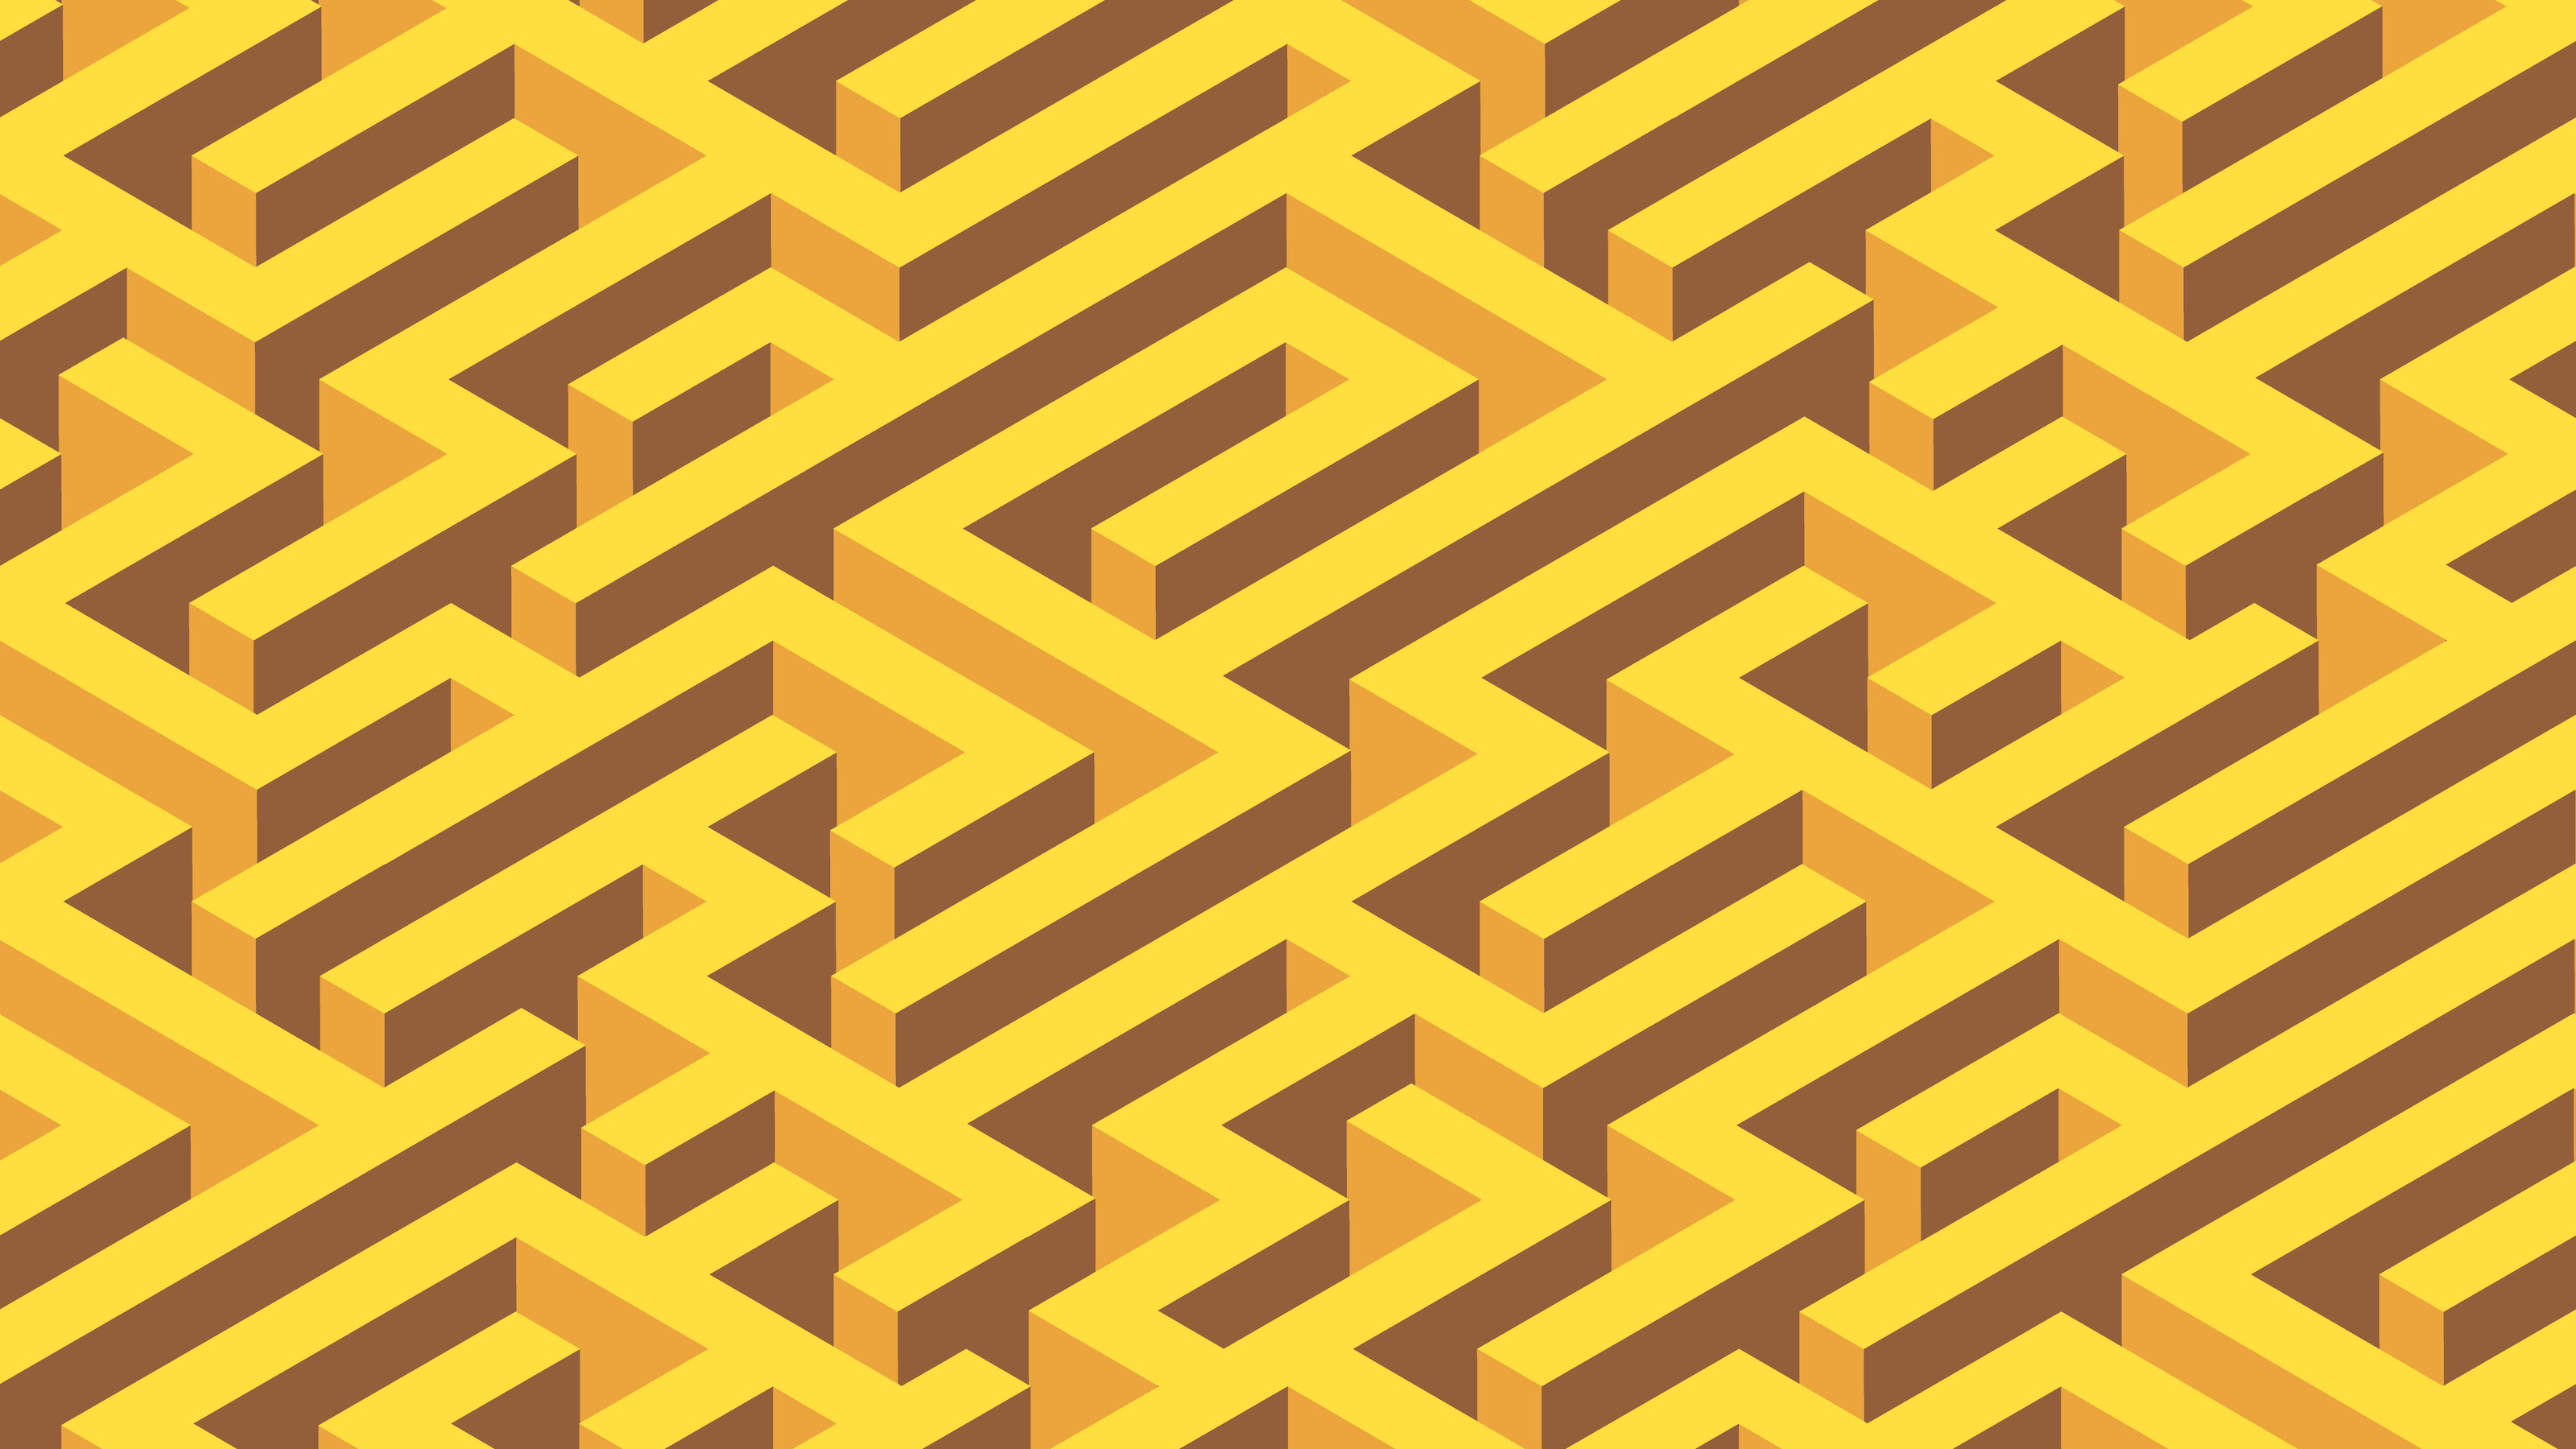 An agile pattern with zig zag lines.